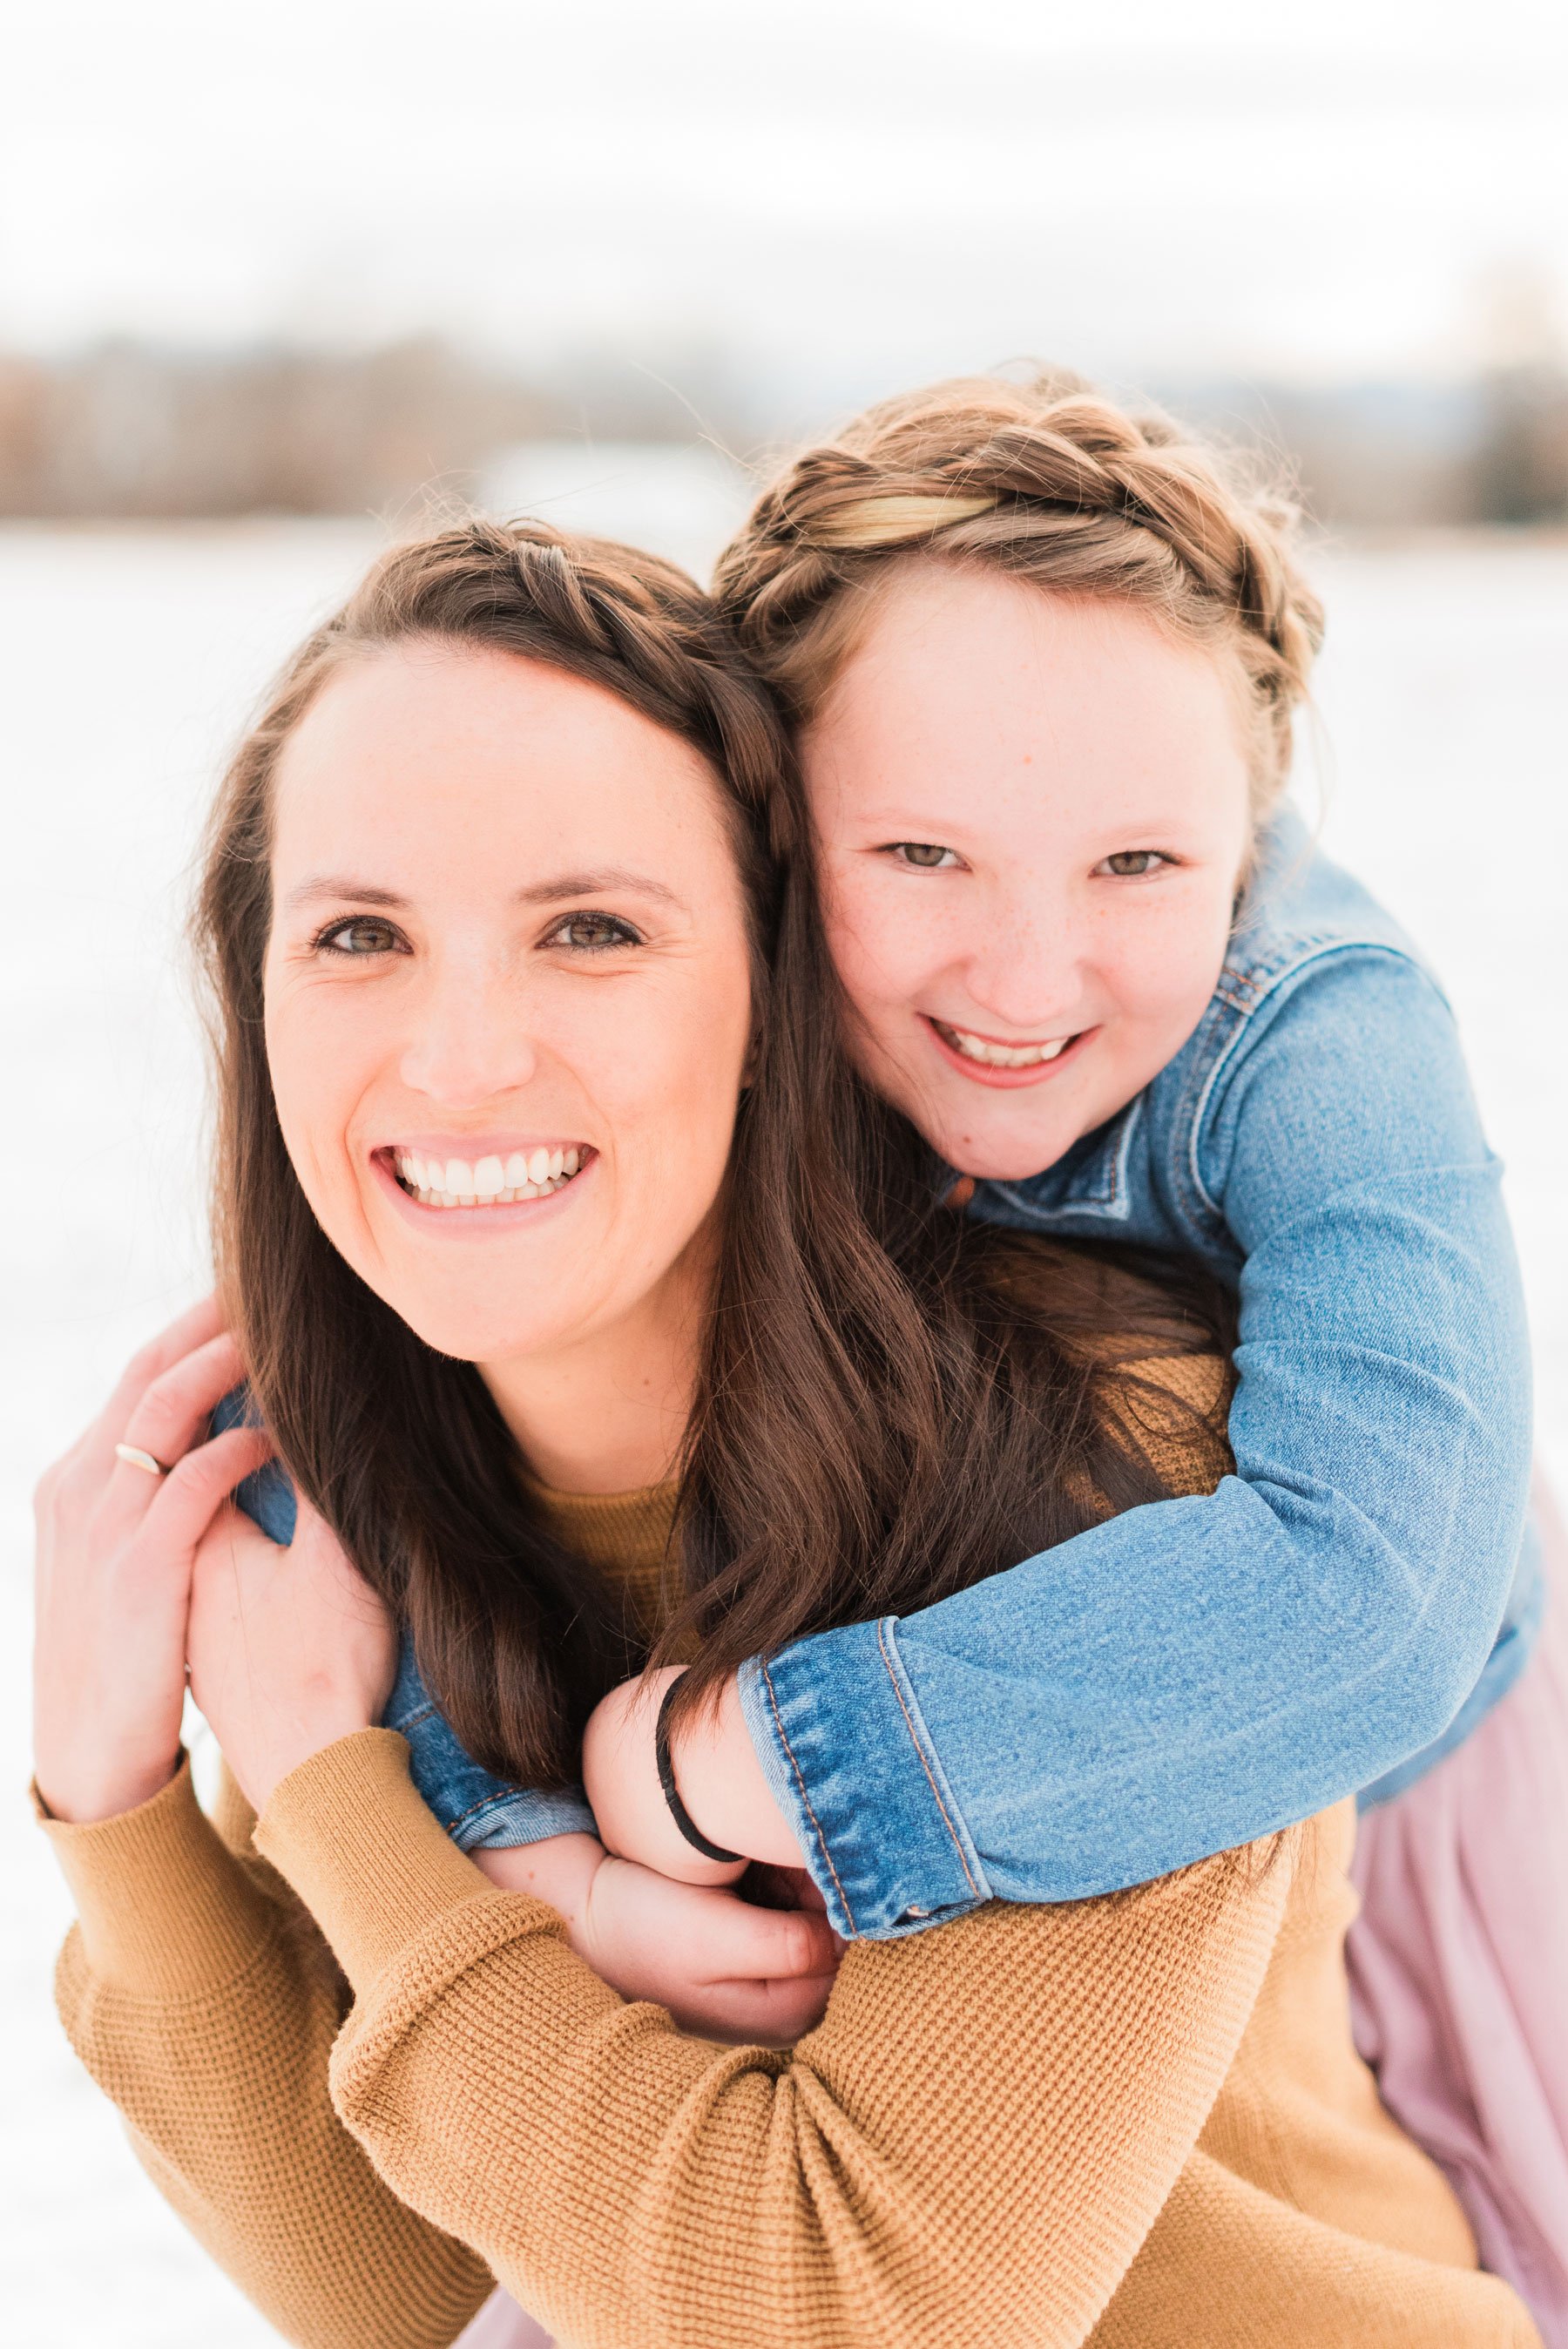  A ten-year-old daughter holds onto her mother's back and smiles over her shoulder in a mommy and me photo shoot by Jacquie Erickson.&nbsp; Genuine moments beautiful relationship #motherdaughterphotos #FamilyPhotographyJourney #atlantafamilyphotograp